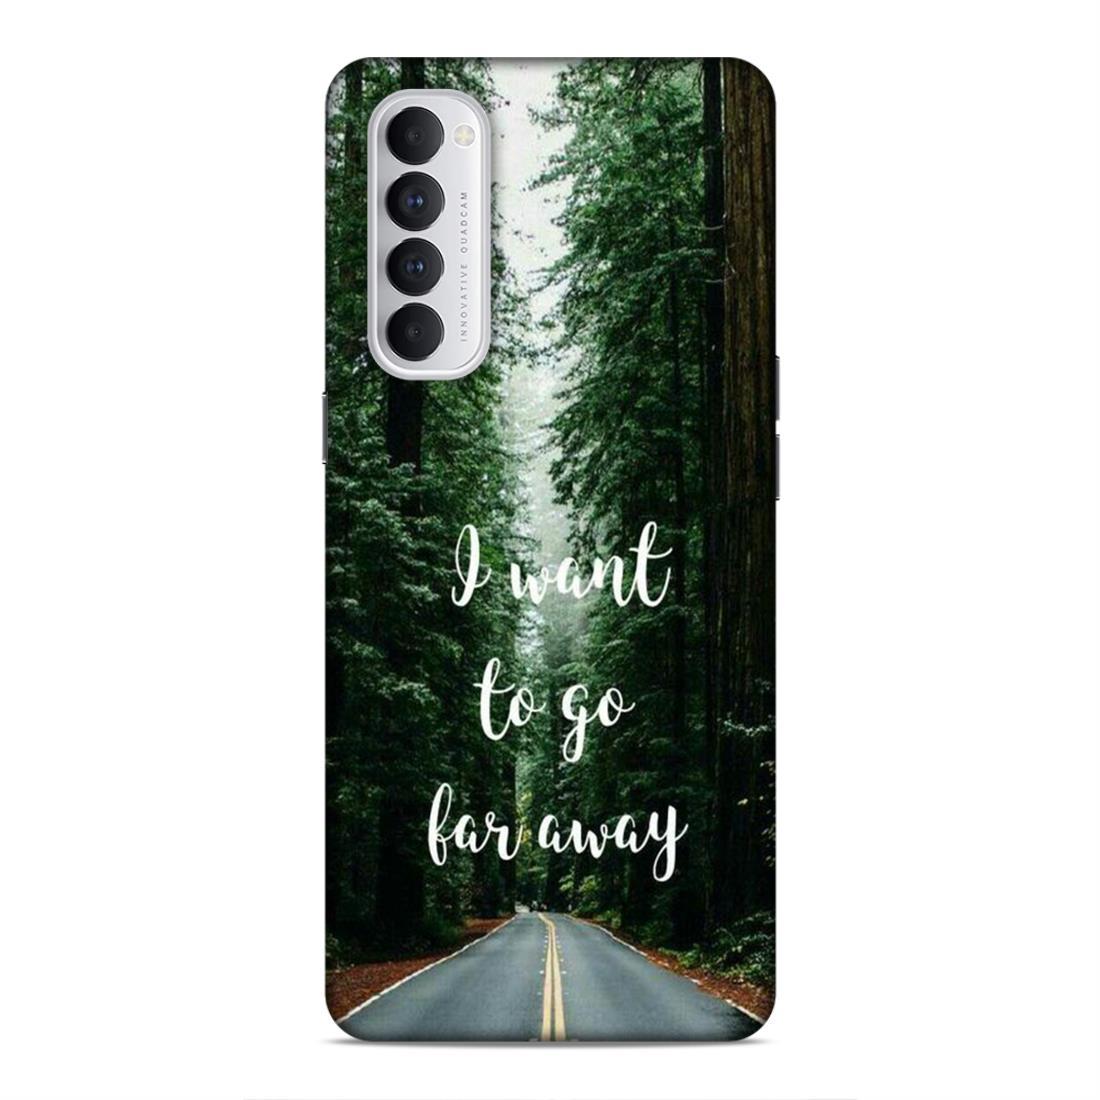 I Want To Go Far Away Oppo Reno 4 Pro Phone Cover